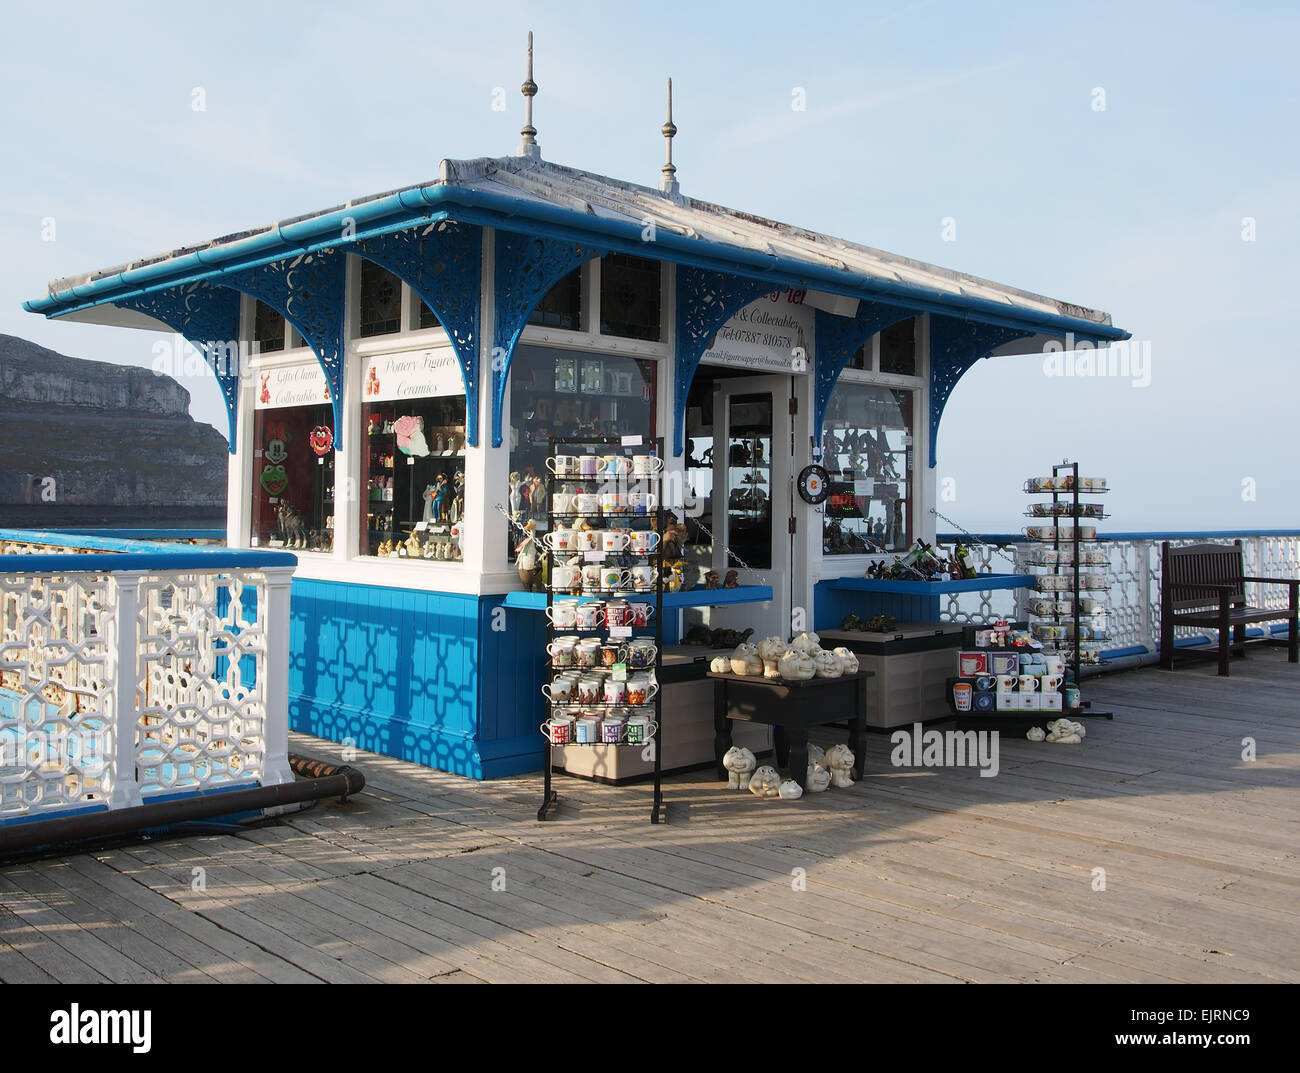 One of the picturesque small souvinir shops on Llandudno pier in Wales, UK. Stock Photo